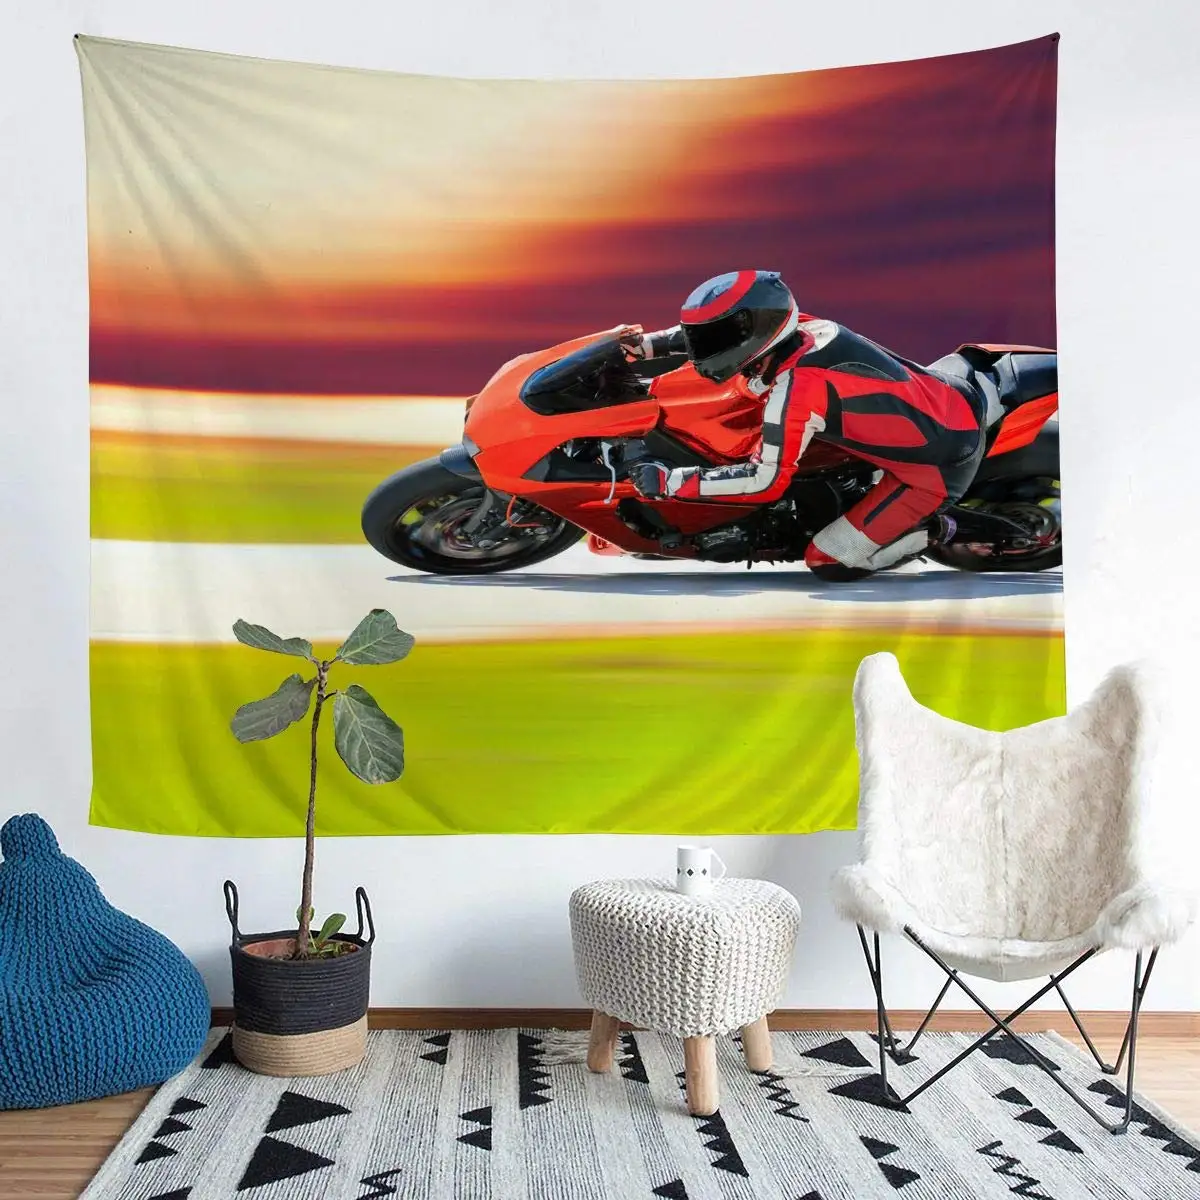 

Motorcycle Tapestry Racing Extreme Sports Tapestries for Boys Girls Wall Hanging Art Cool Home Decor Bedroom Living Room Dorm